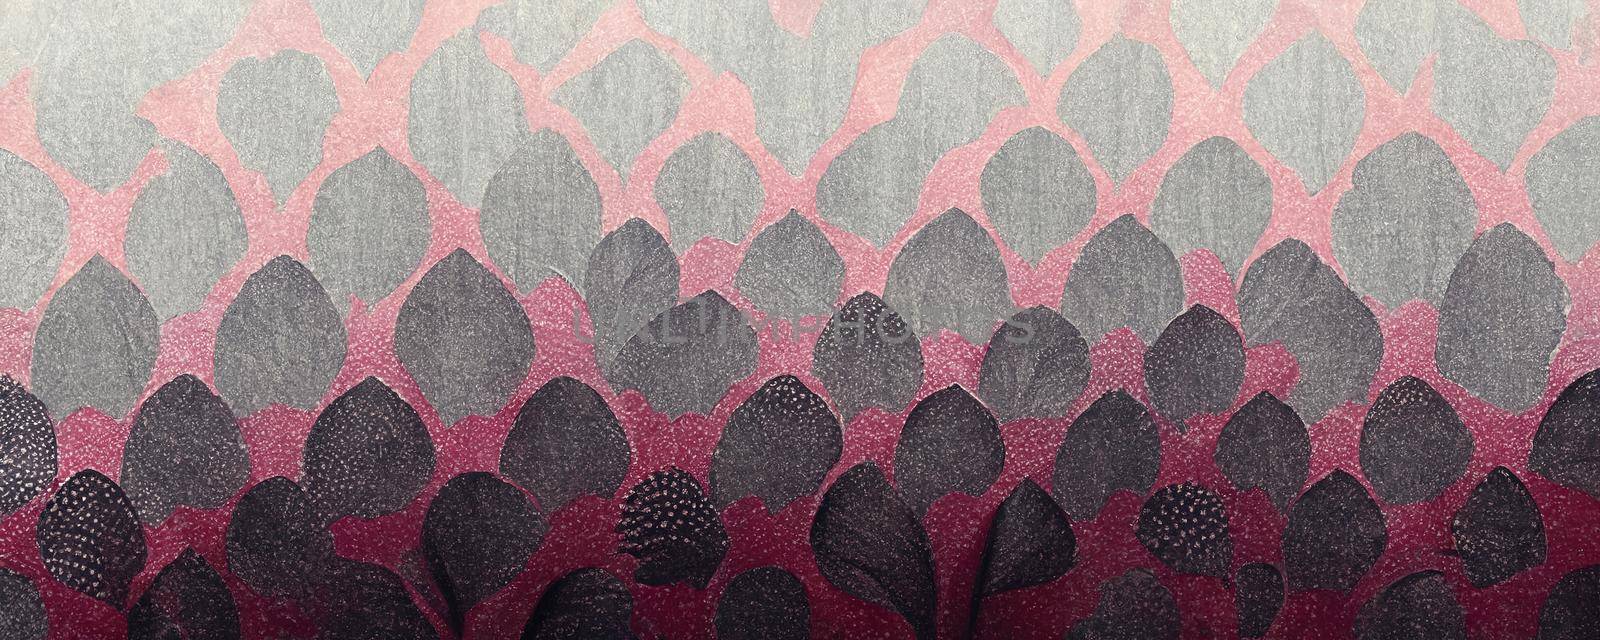 ,black leaves on a pink backgroundColorful abstract wallpaper texture background illustration by TRMK